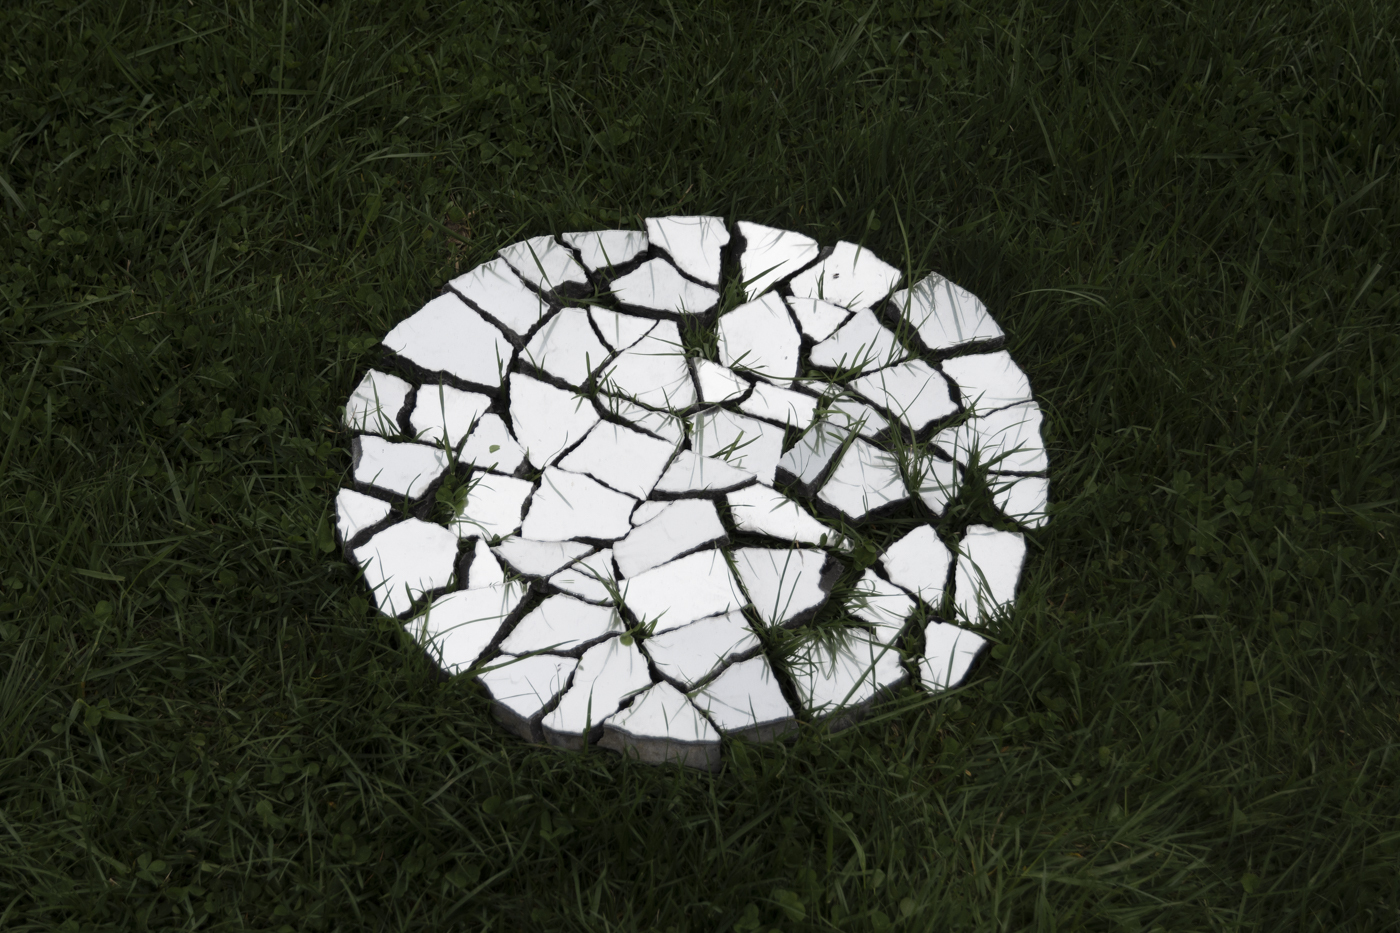 A circular shaped mirror is shattered and lying on the grass.